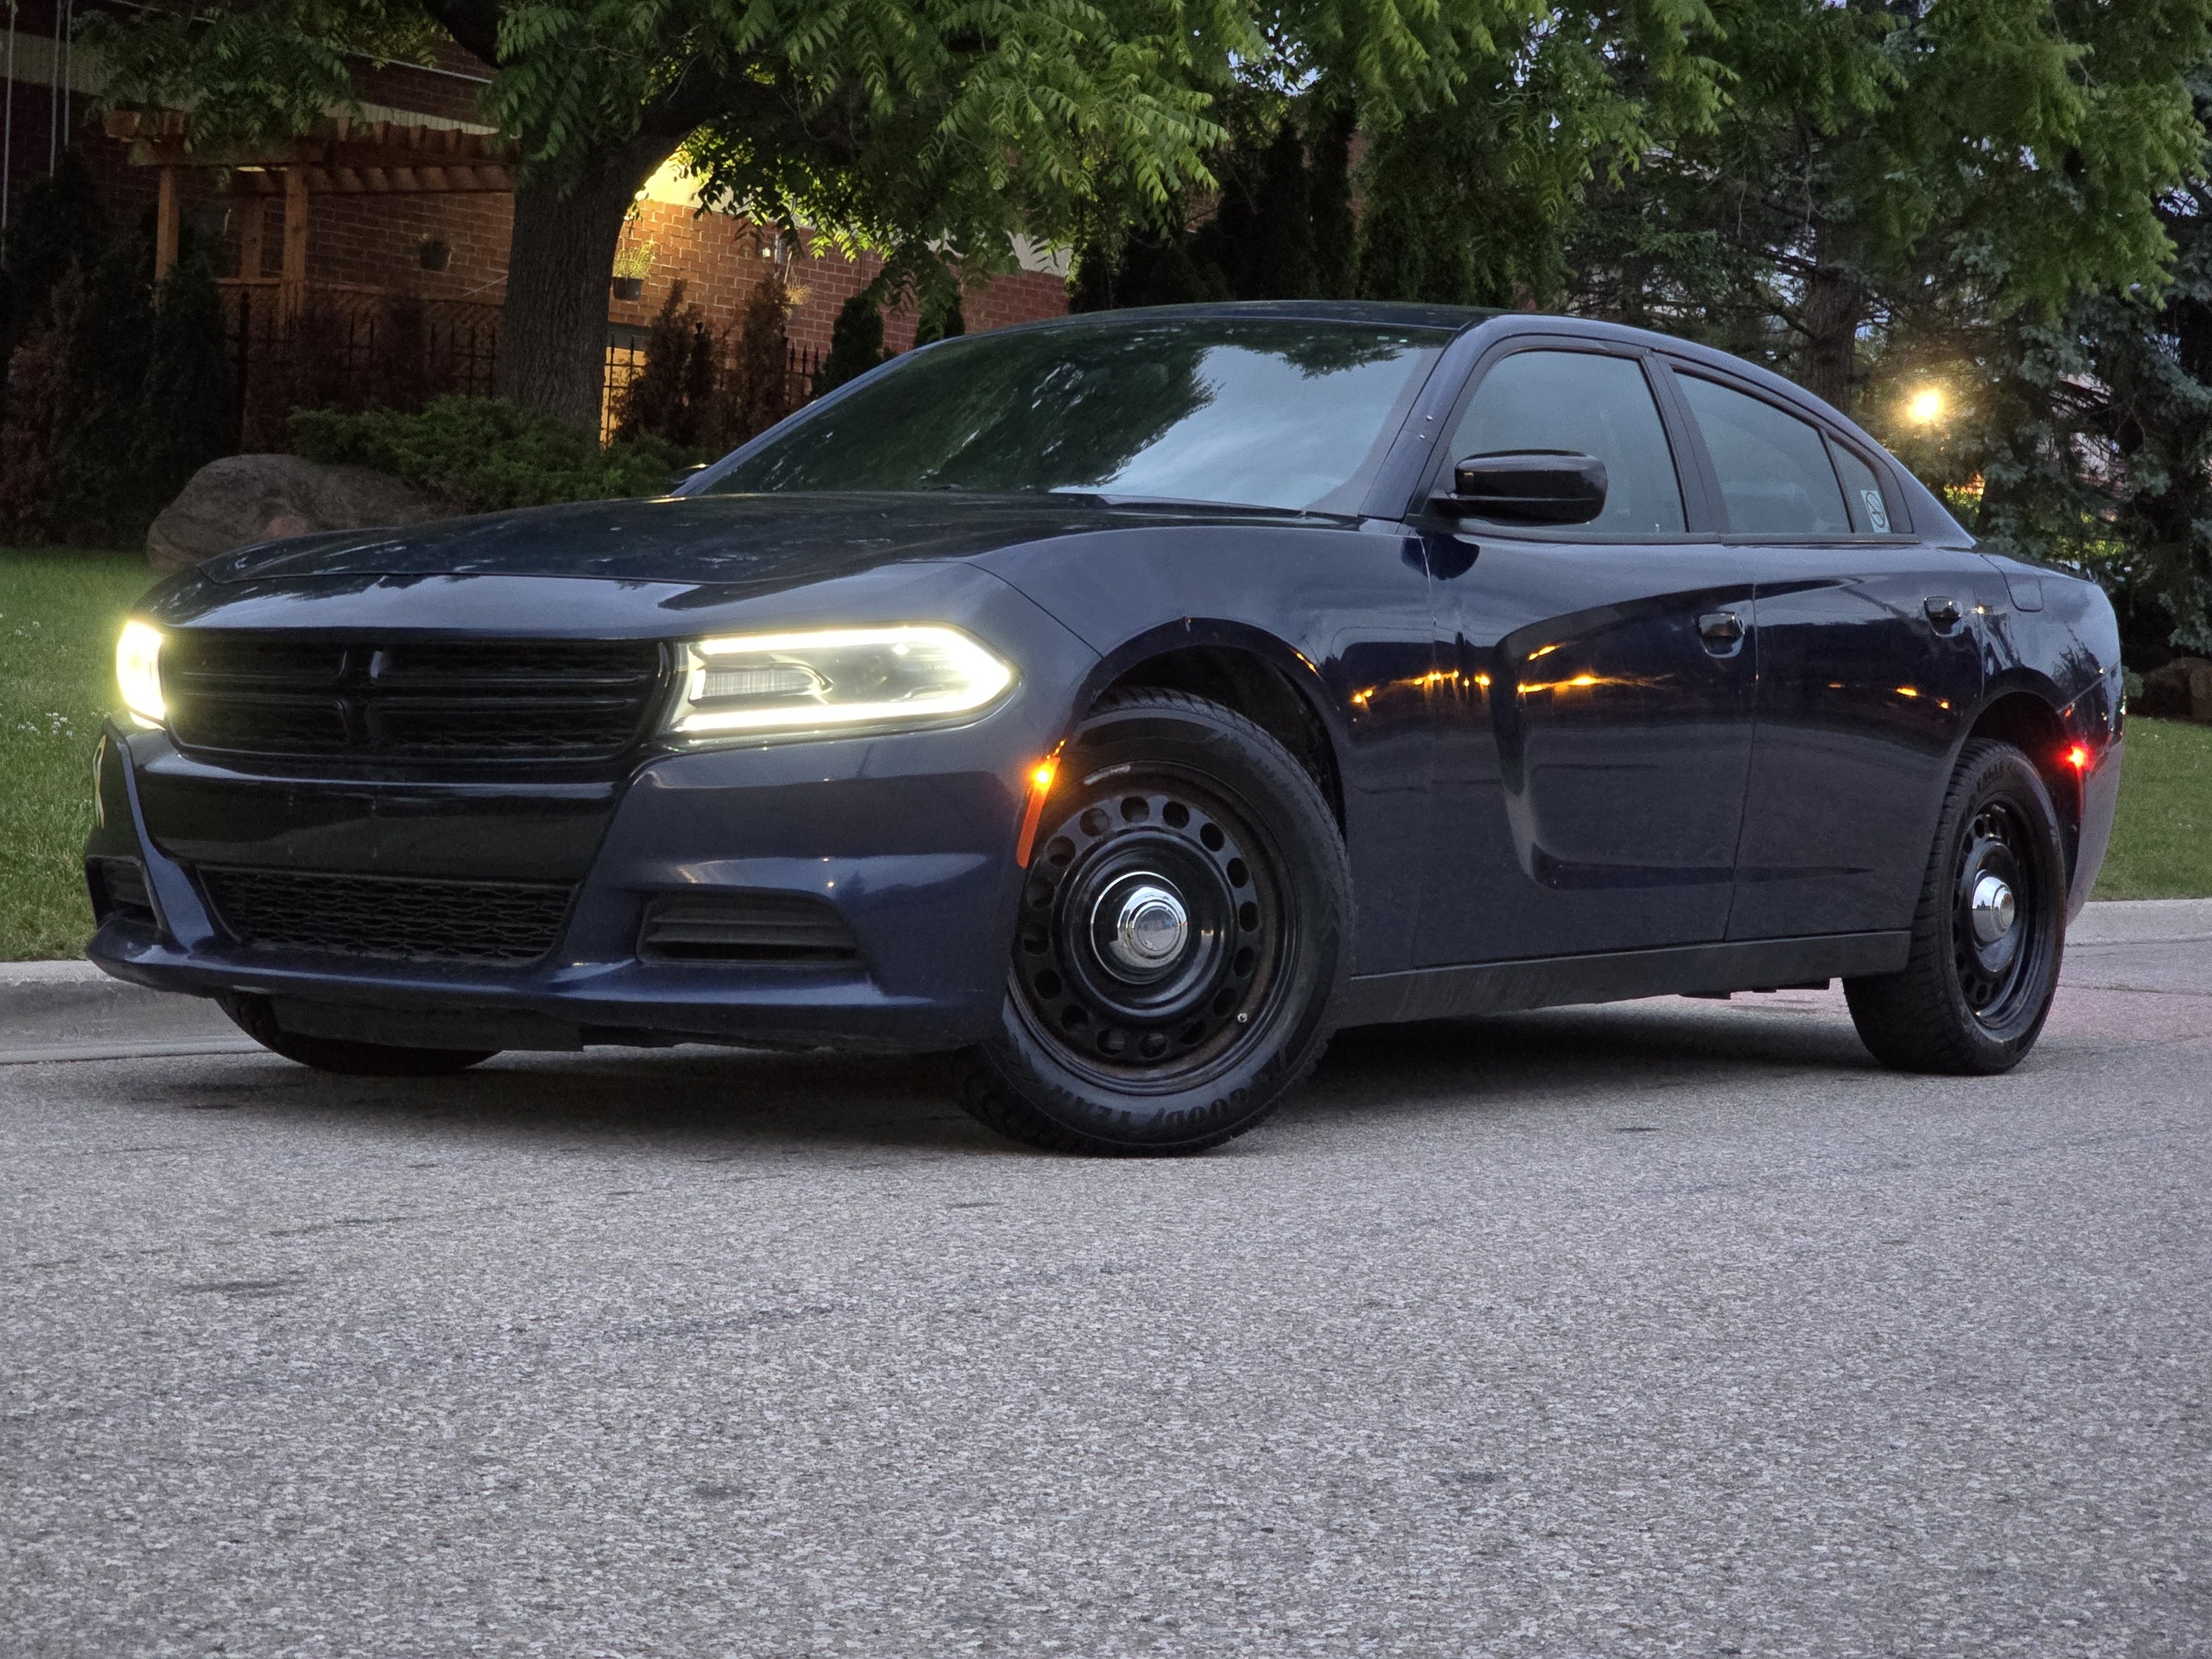 2019 Dodge Charger AWD 5.7 hemi **One Owner *120,000km's* Financing 